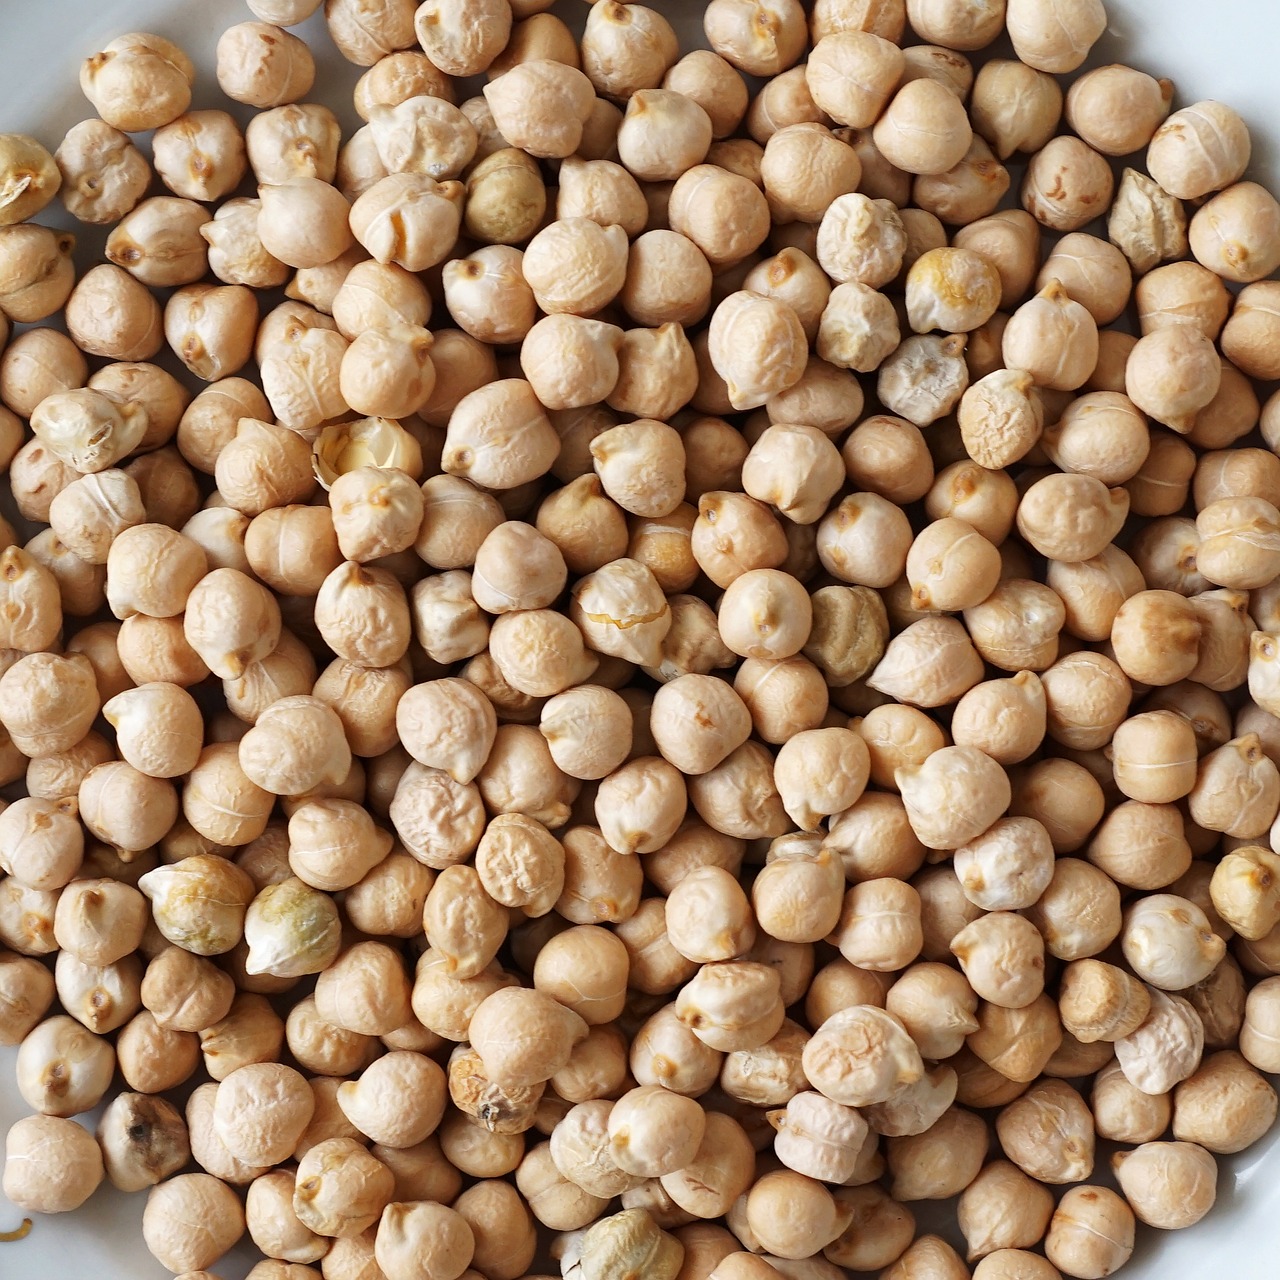 chickpeas grains eating free photo